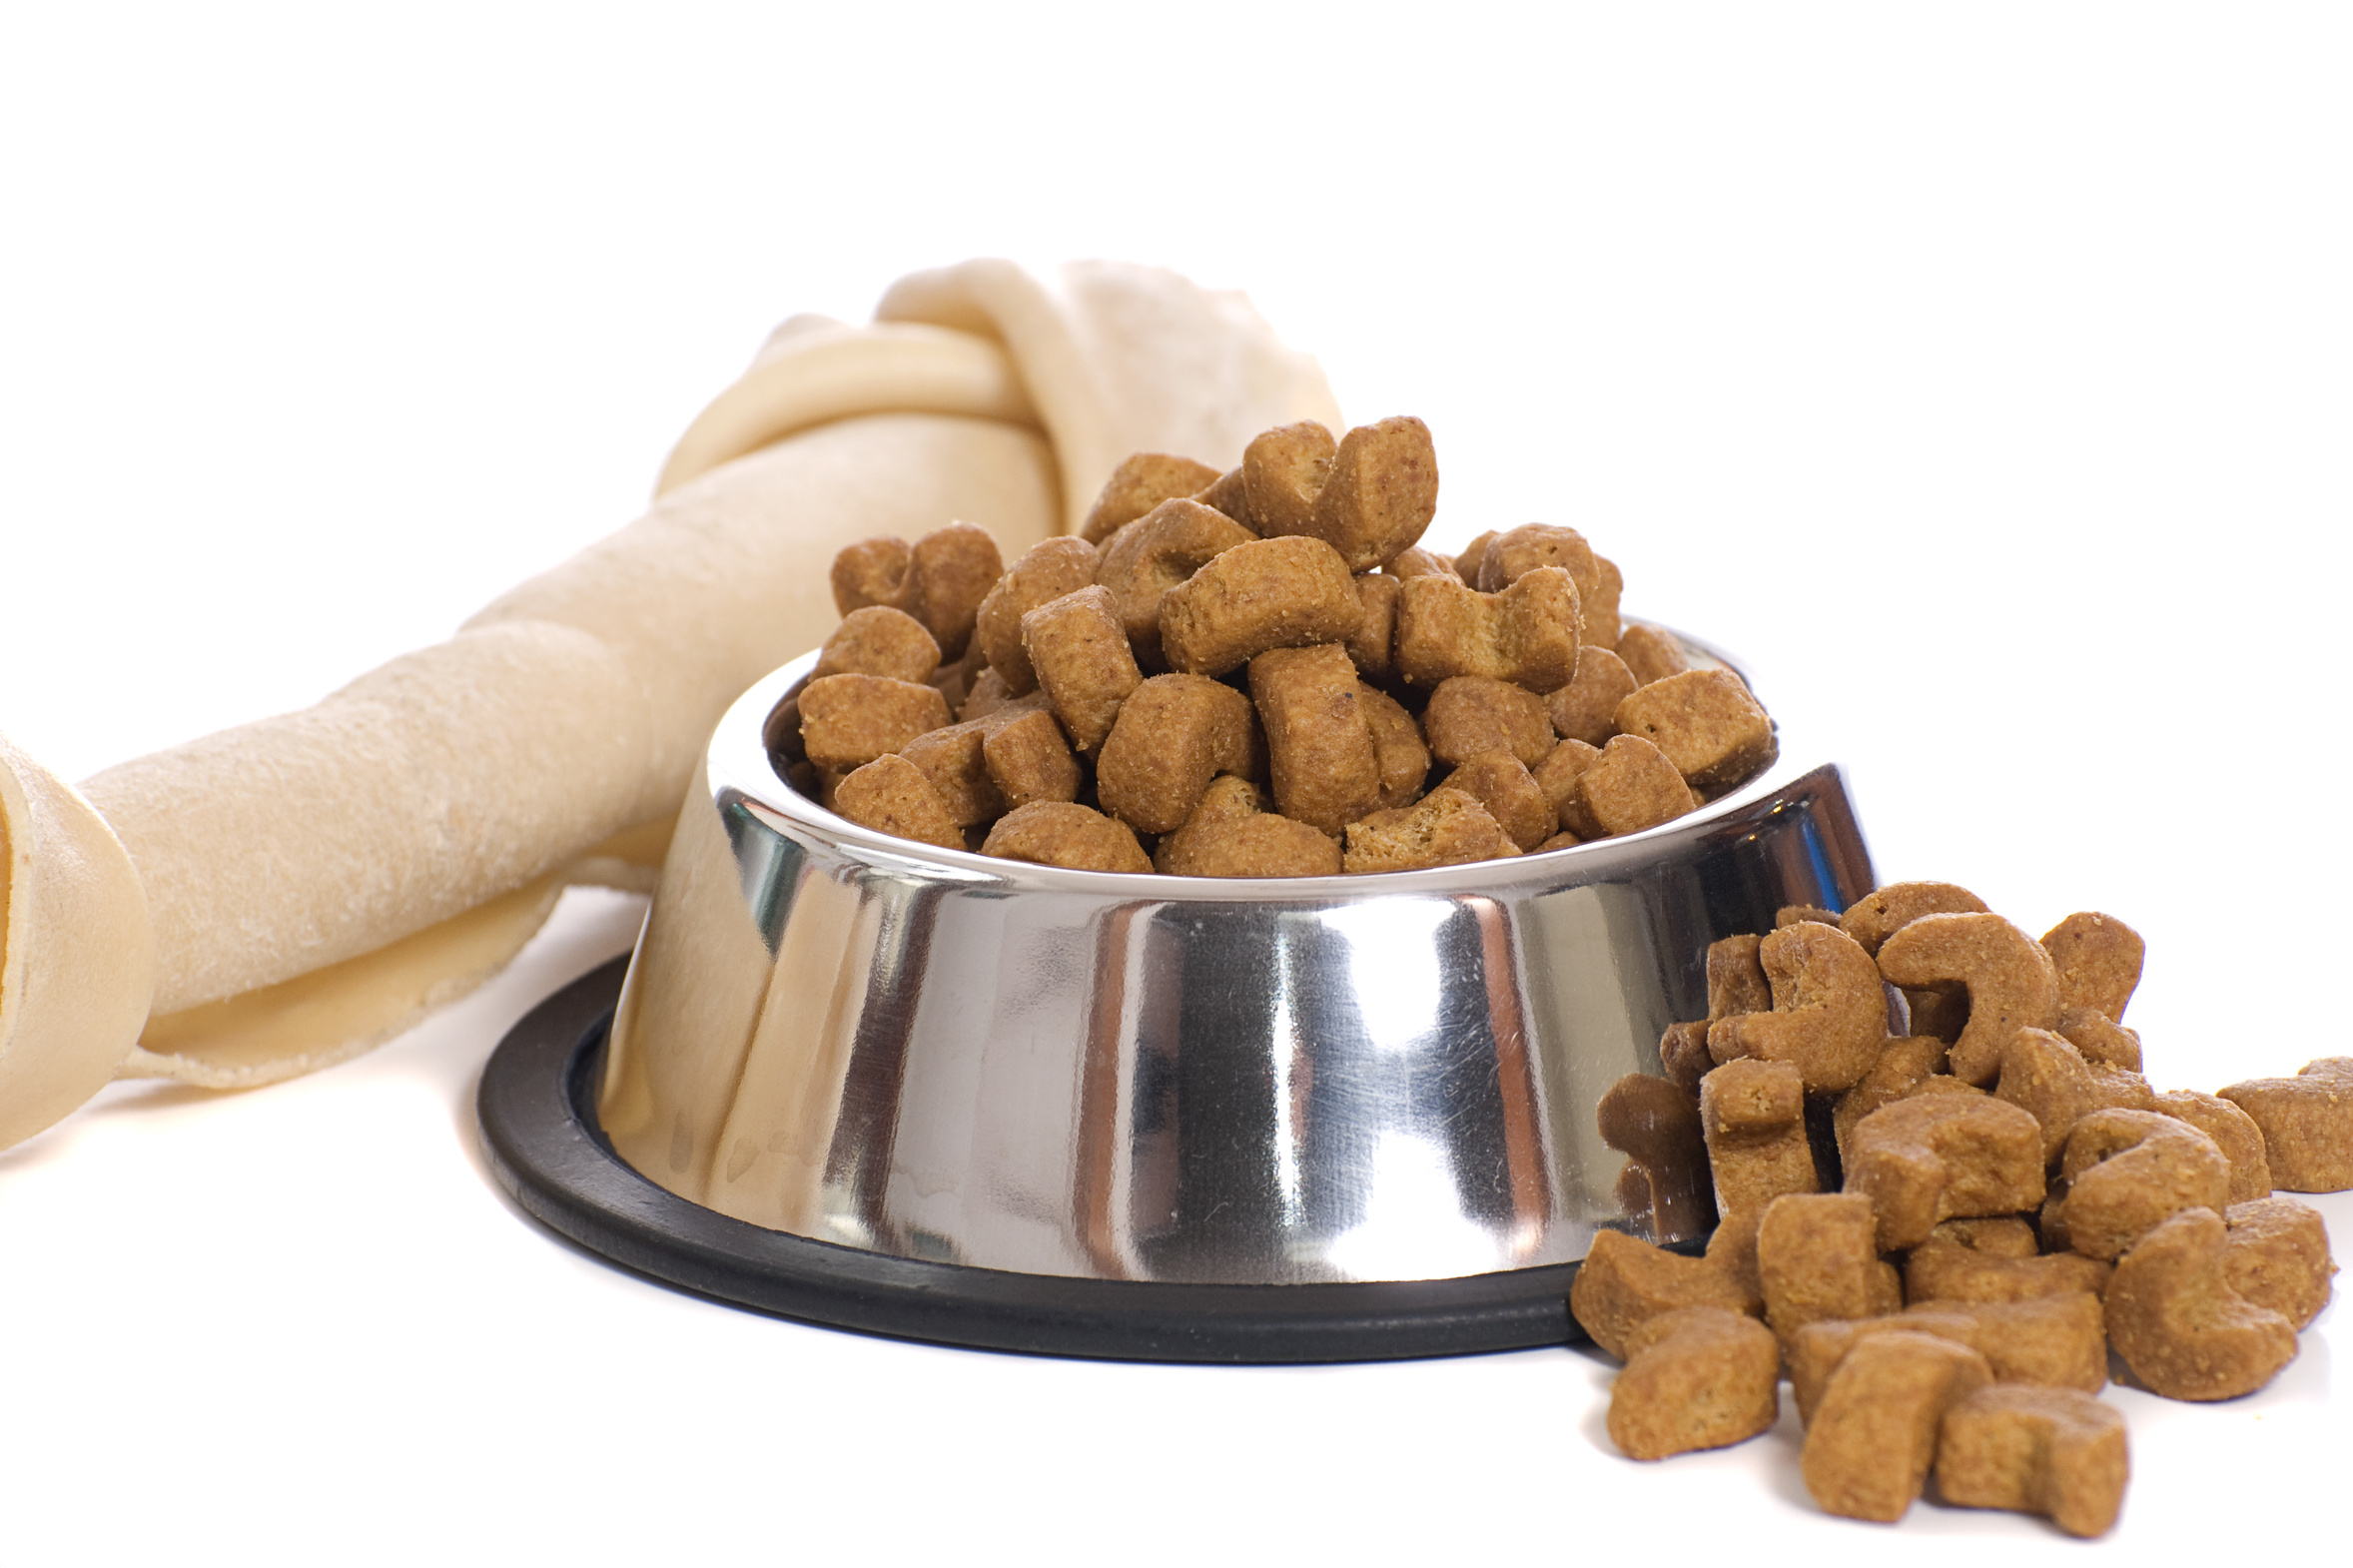 Bravo Packing, Inc. expands previously recall of pet food products due to Salmonella and Listeria monocytogenes